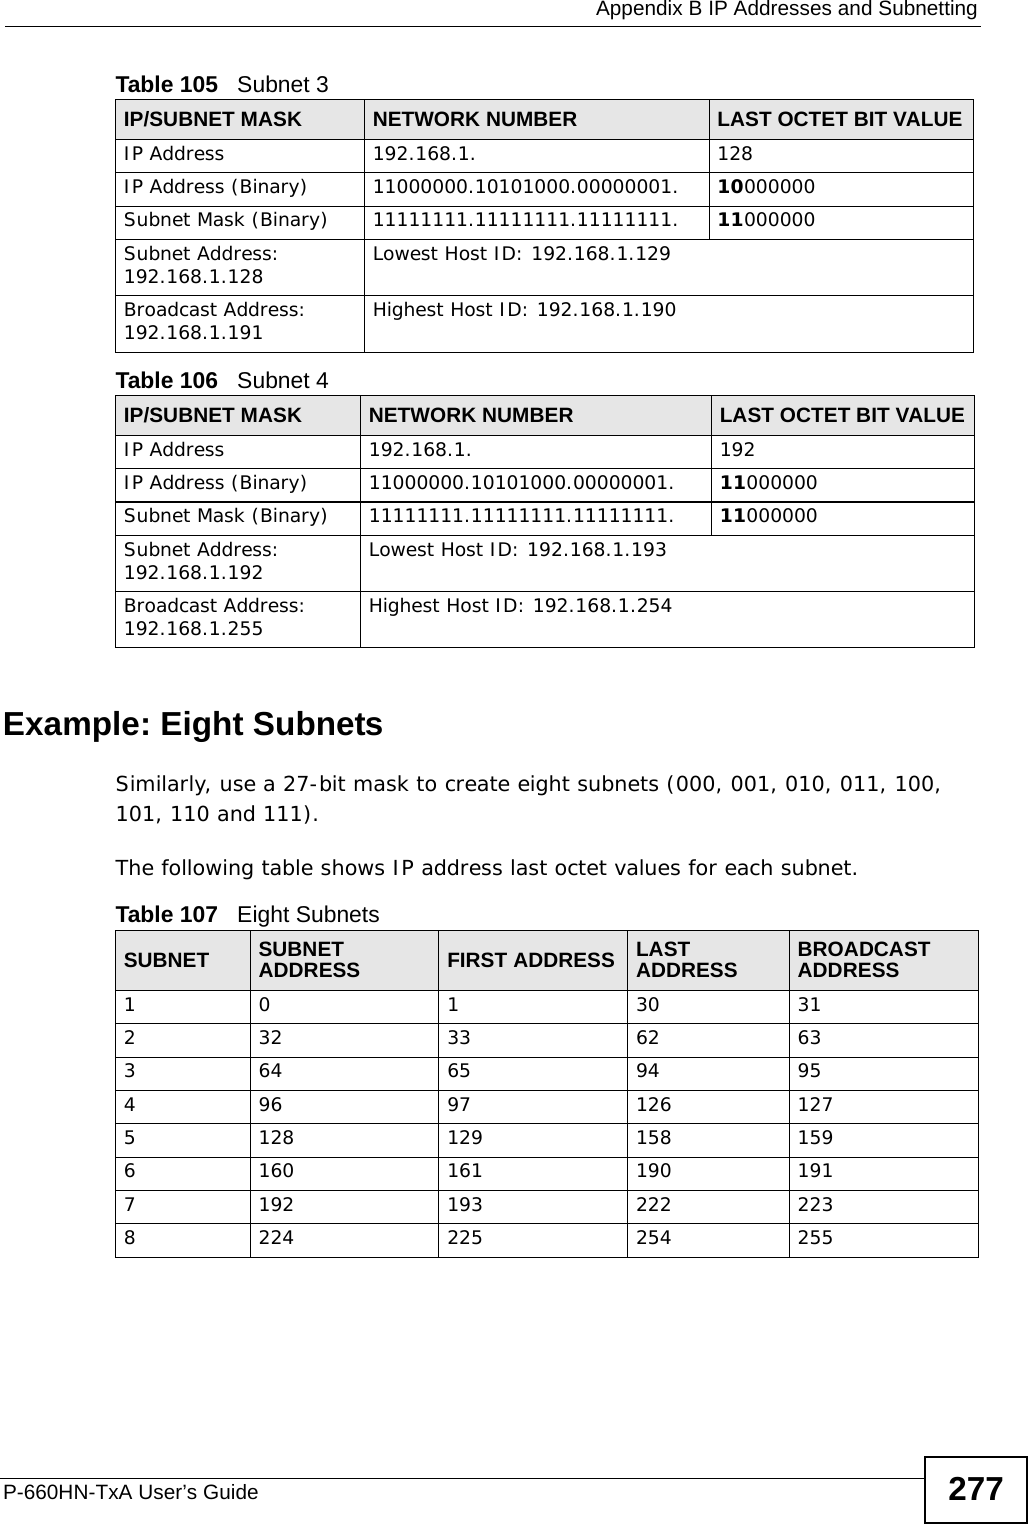  Appendix B IP Addresses and SubnettingP-660HN-TxA User’s Guide 277Example: Eight SubnetsSimilarly, use a 27-bit mask to create eight subnets (000, 001, 010, 011, 100, 101, 110 and 111). The following table shows IP address last octet values for each subnet.Table 105   Subnet 3IP/SUBNET MASK NETWORK NUMBER LAST OCTET BIT VALUEIP Address 192.168.1. 128IP Address (Binary) 11000000.10101000.00000001. 10000000Subnet Mask (Binary) 11111111.11111111.11111111. 11000000Subnet Address: 192.168.1.128 Lowest Host ID: 192.168.1.129Broadcast Address: 192.168.1.191 Highest Host ID: 192.168.1.190Table 106   Subnet 4IP/SUBNET MASK NETWORK NUMBER LAST OCTET BIT VALUEIP Address 192.168.1. 192IP Address (Binary) 11000000.10101000.00000001. 11000000Subnet Mask (Binary) 11111111.11111111.11111111. 11000000Subnet Address: 192.168.1.192 Lowest Host ID: 192.168.1.193Broadcast Address: 192.168.1.255 Highest Host ID: 192.168.1.254Table 107   Eight SubnetsSUBNET SUBNET ADDRESS FIRST ADDRESS LAST ADDRESS BROADCAST ADDRESS1 0 1 30 31232 33 62 63364 65 94 95496 97 126 1275128 129 158 1596160 161 190 1917192 193 222 2238224 225 254 255